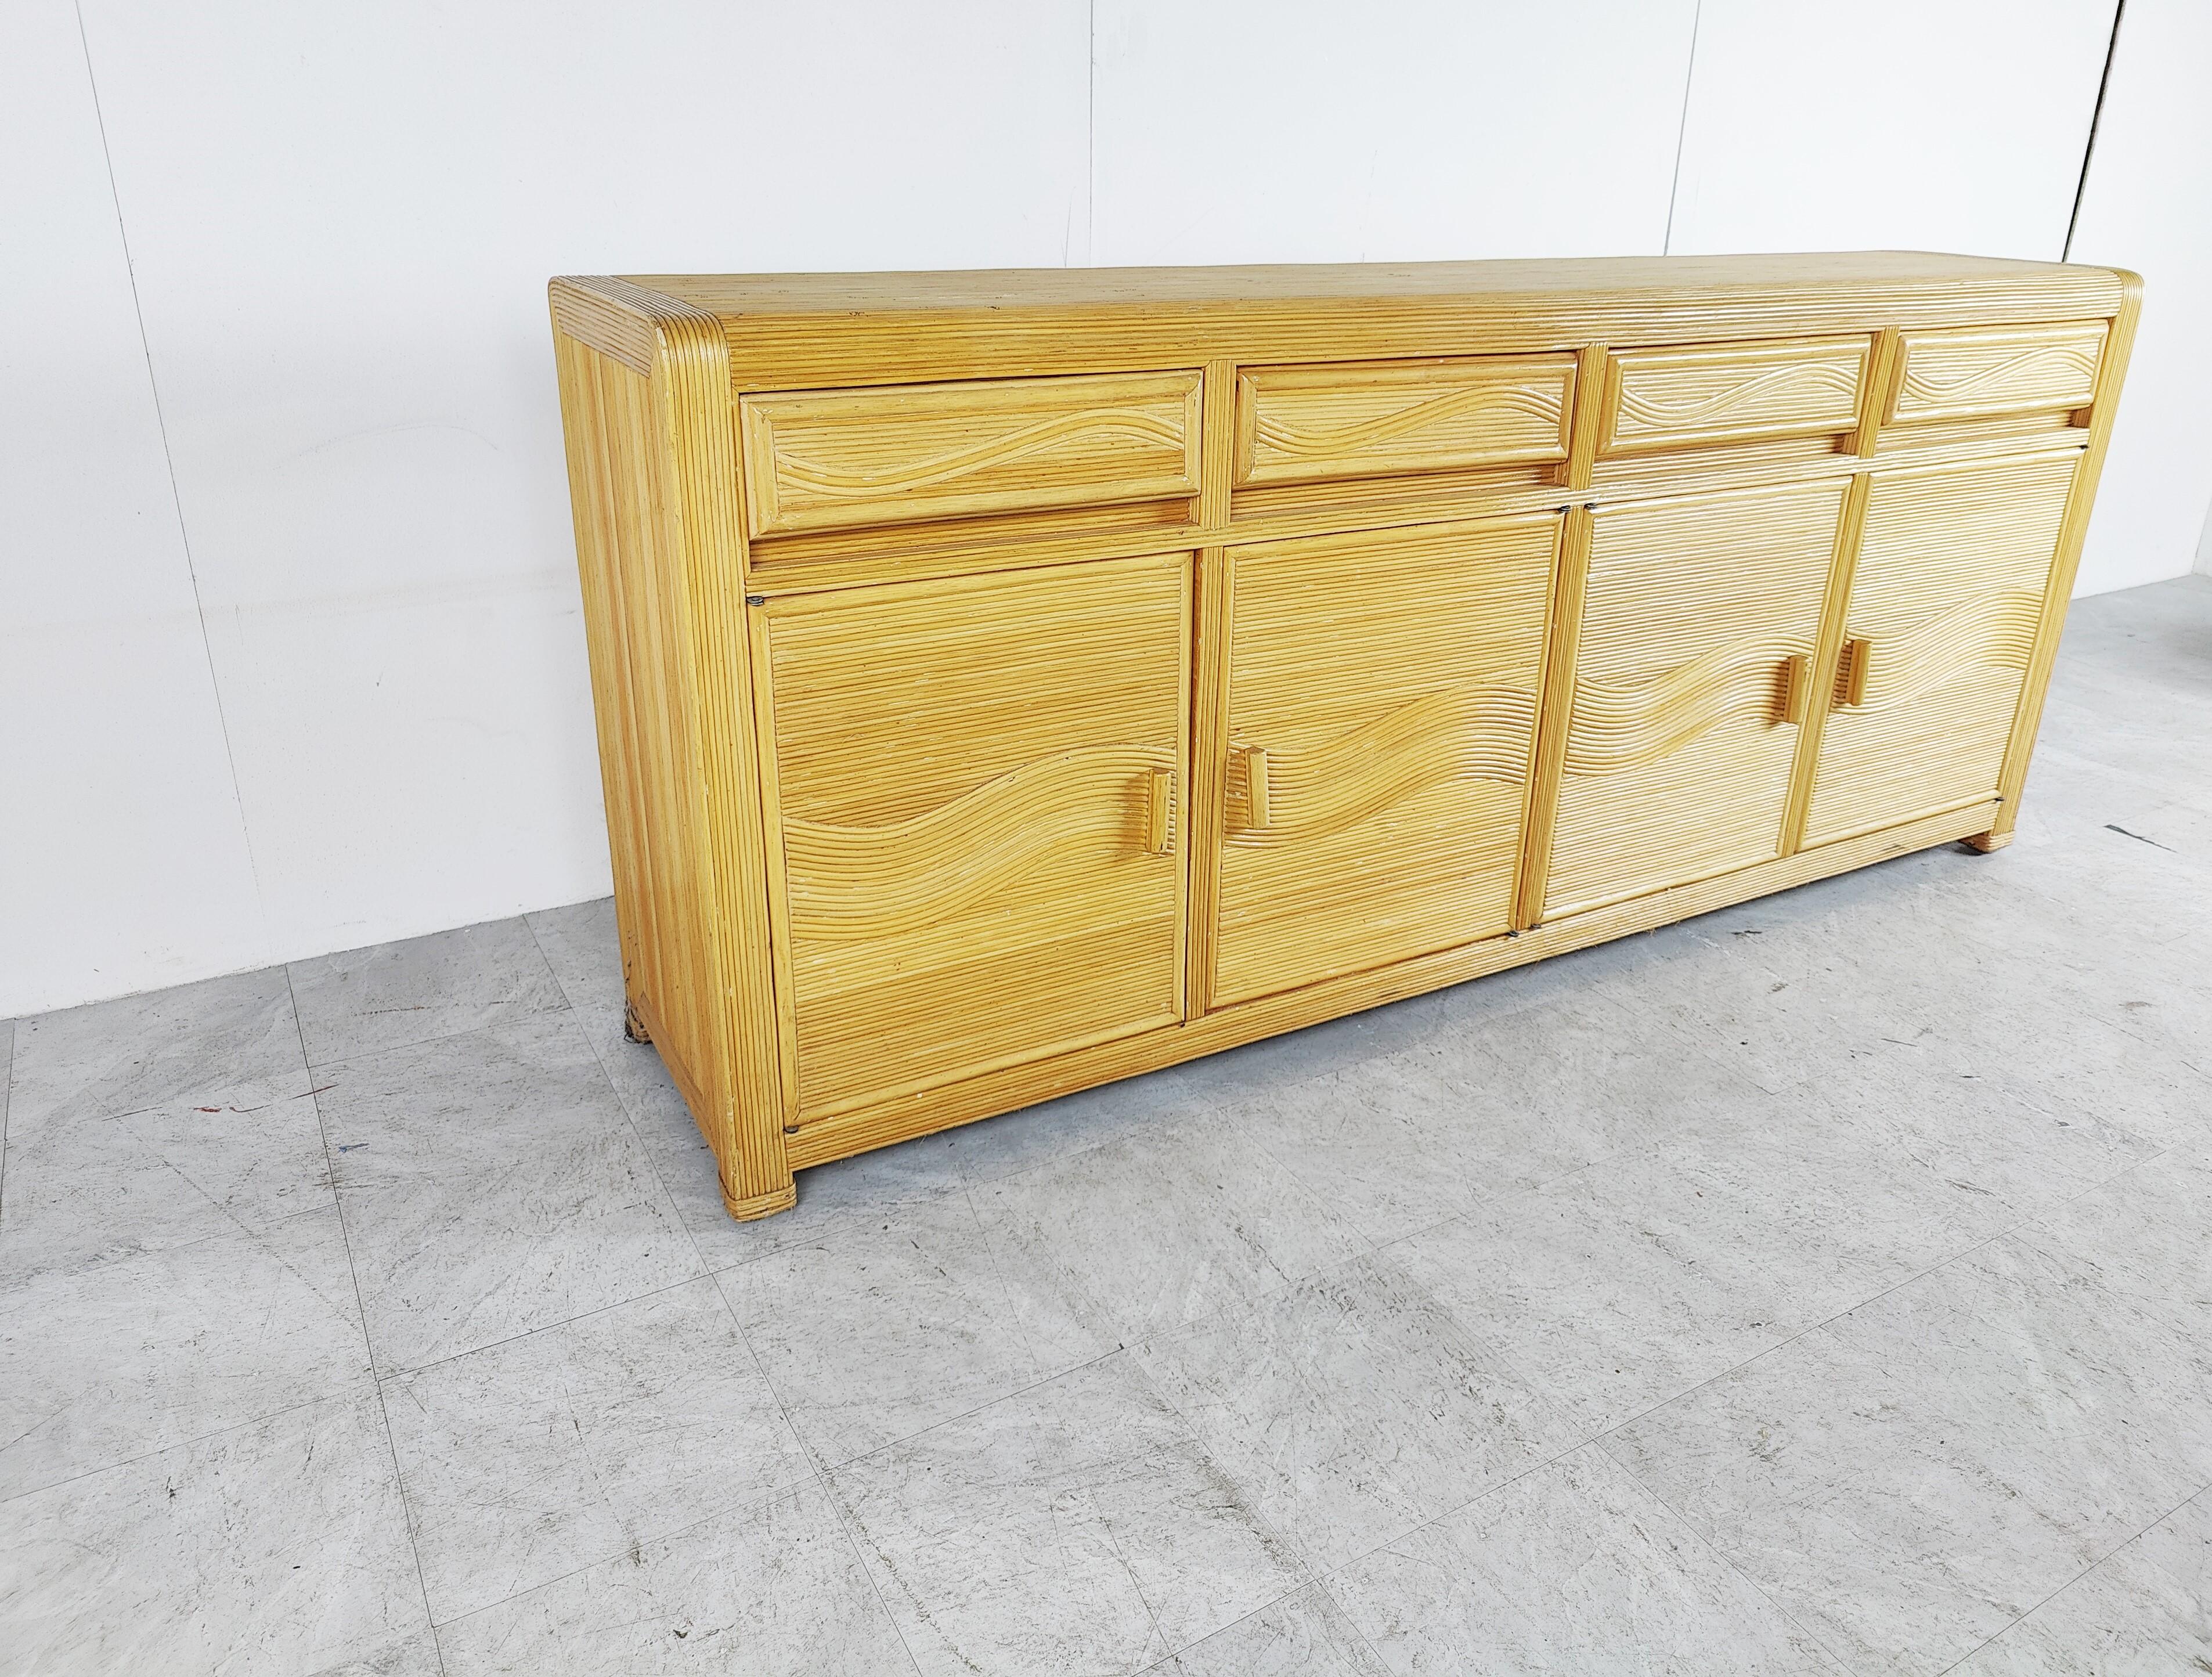 Elegant bamboo and rattan sideboard with four doors and drawers.

Beautiful sideboard with a wave pattern in the doors and drawers.

Very much in the style of Vivai Del sud

Good condition, normal wear.

1970s -